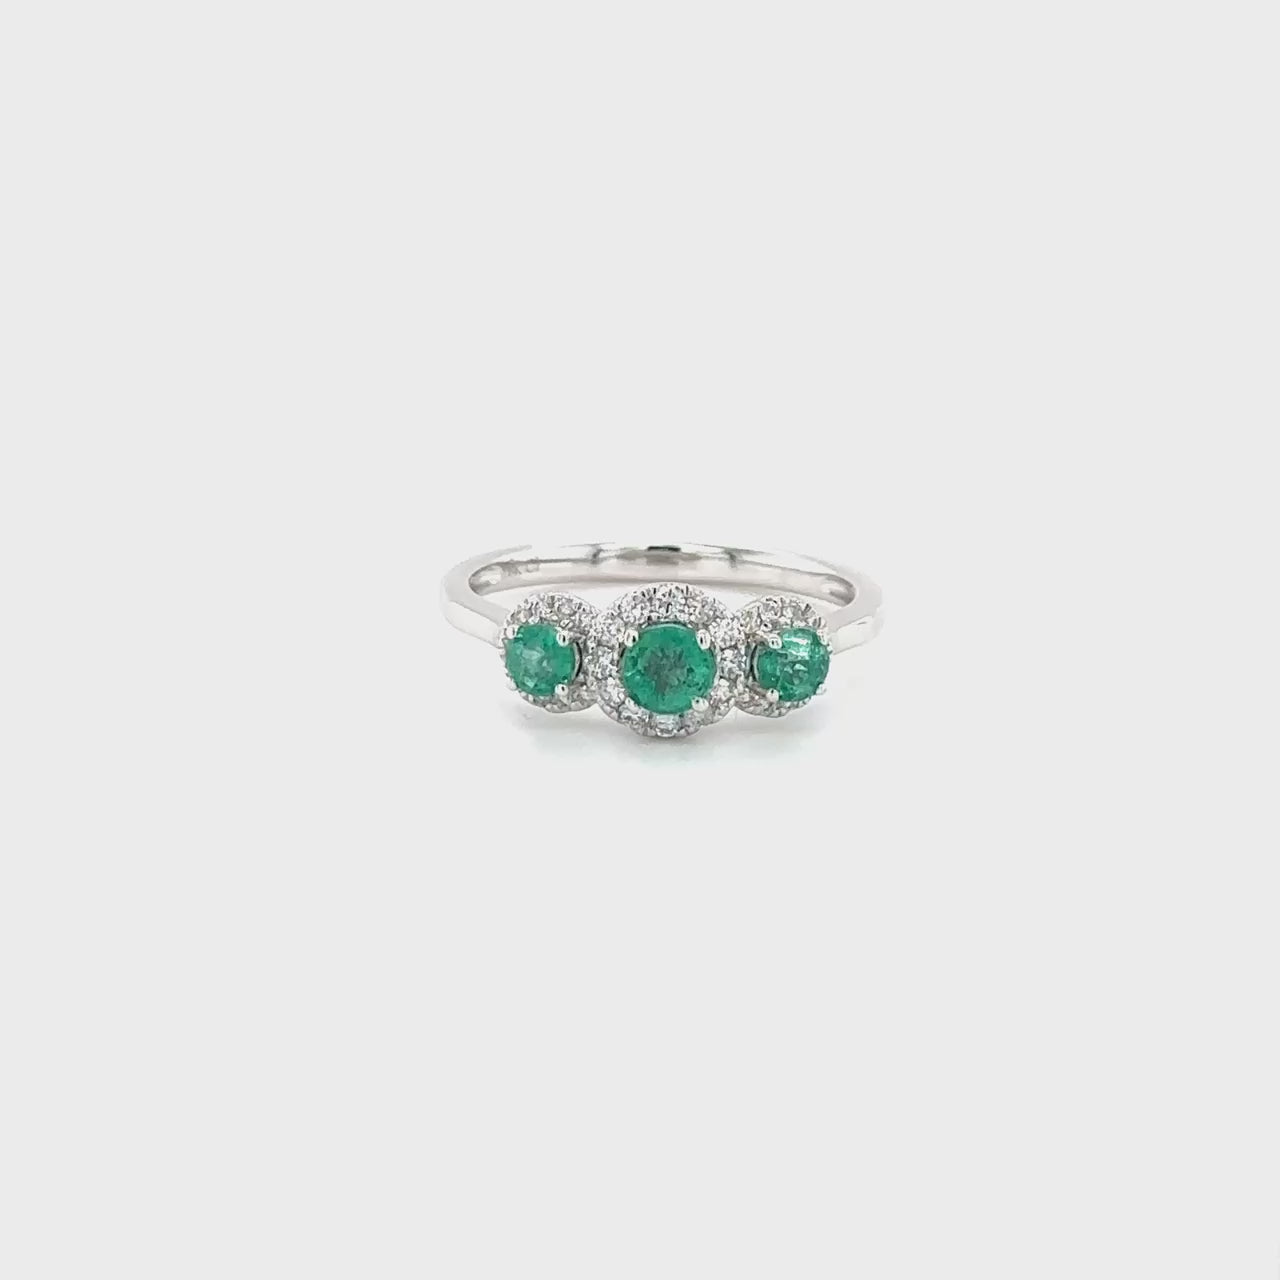 A captivating Round Emerald & Diamond Halo Ring, crafted to perfection with shimmering diamonds and a brilliant emerald centerpiece, ideal for adding a touch of glamour to any ensemble